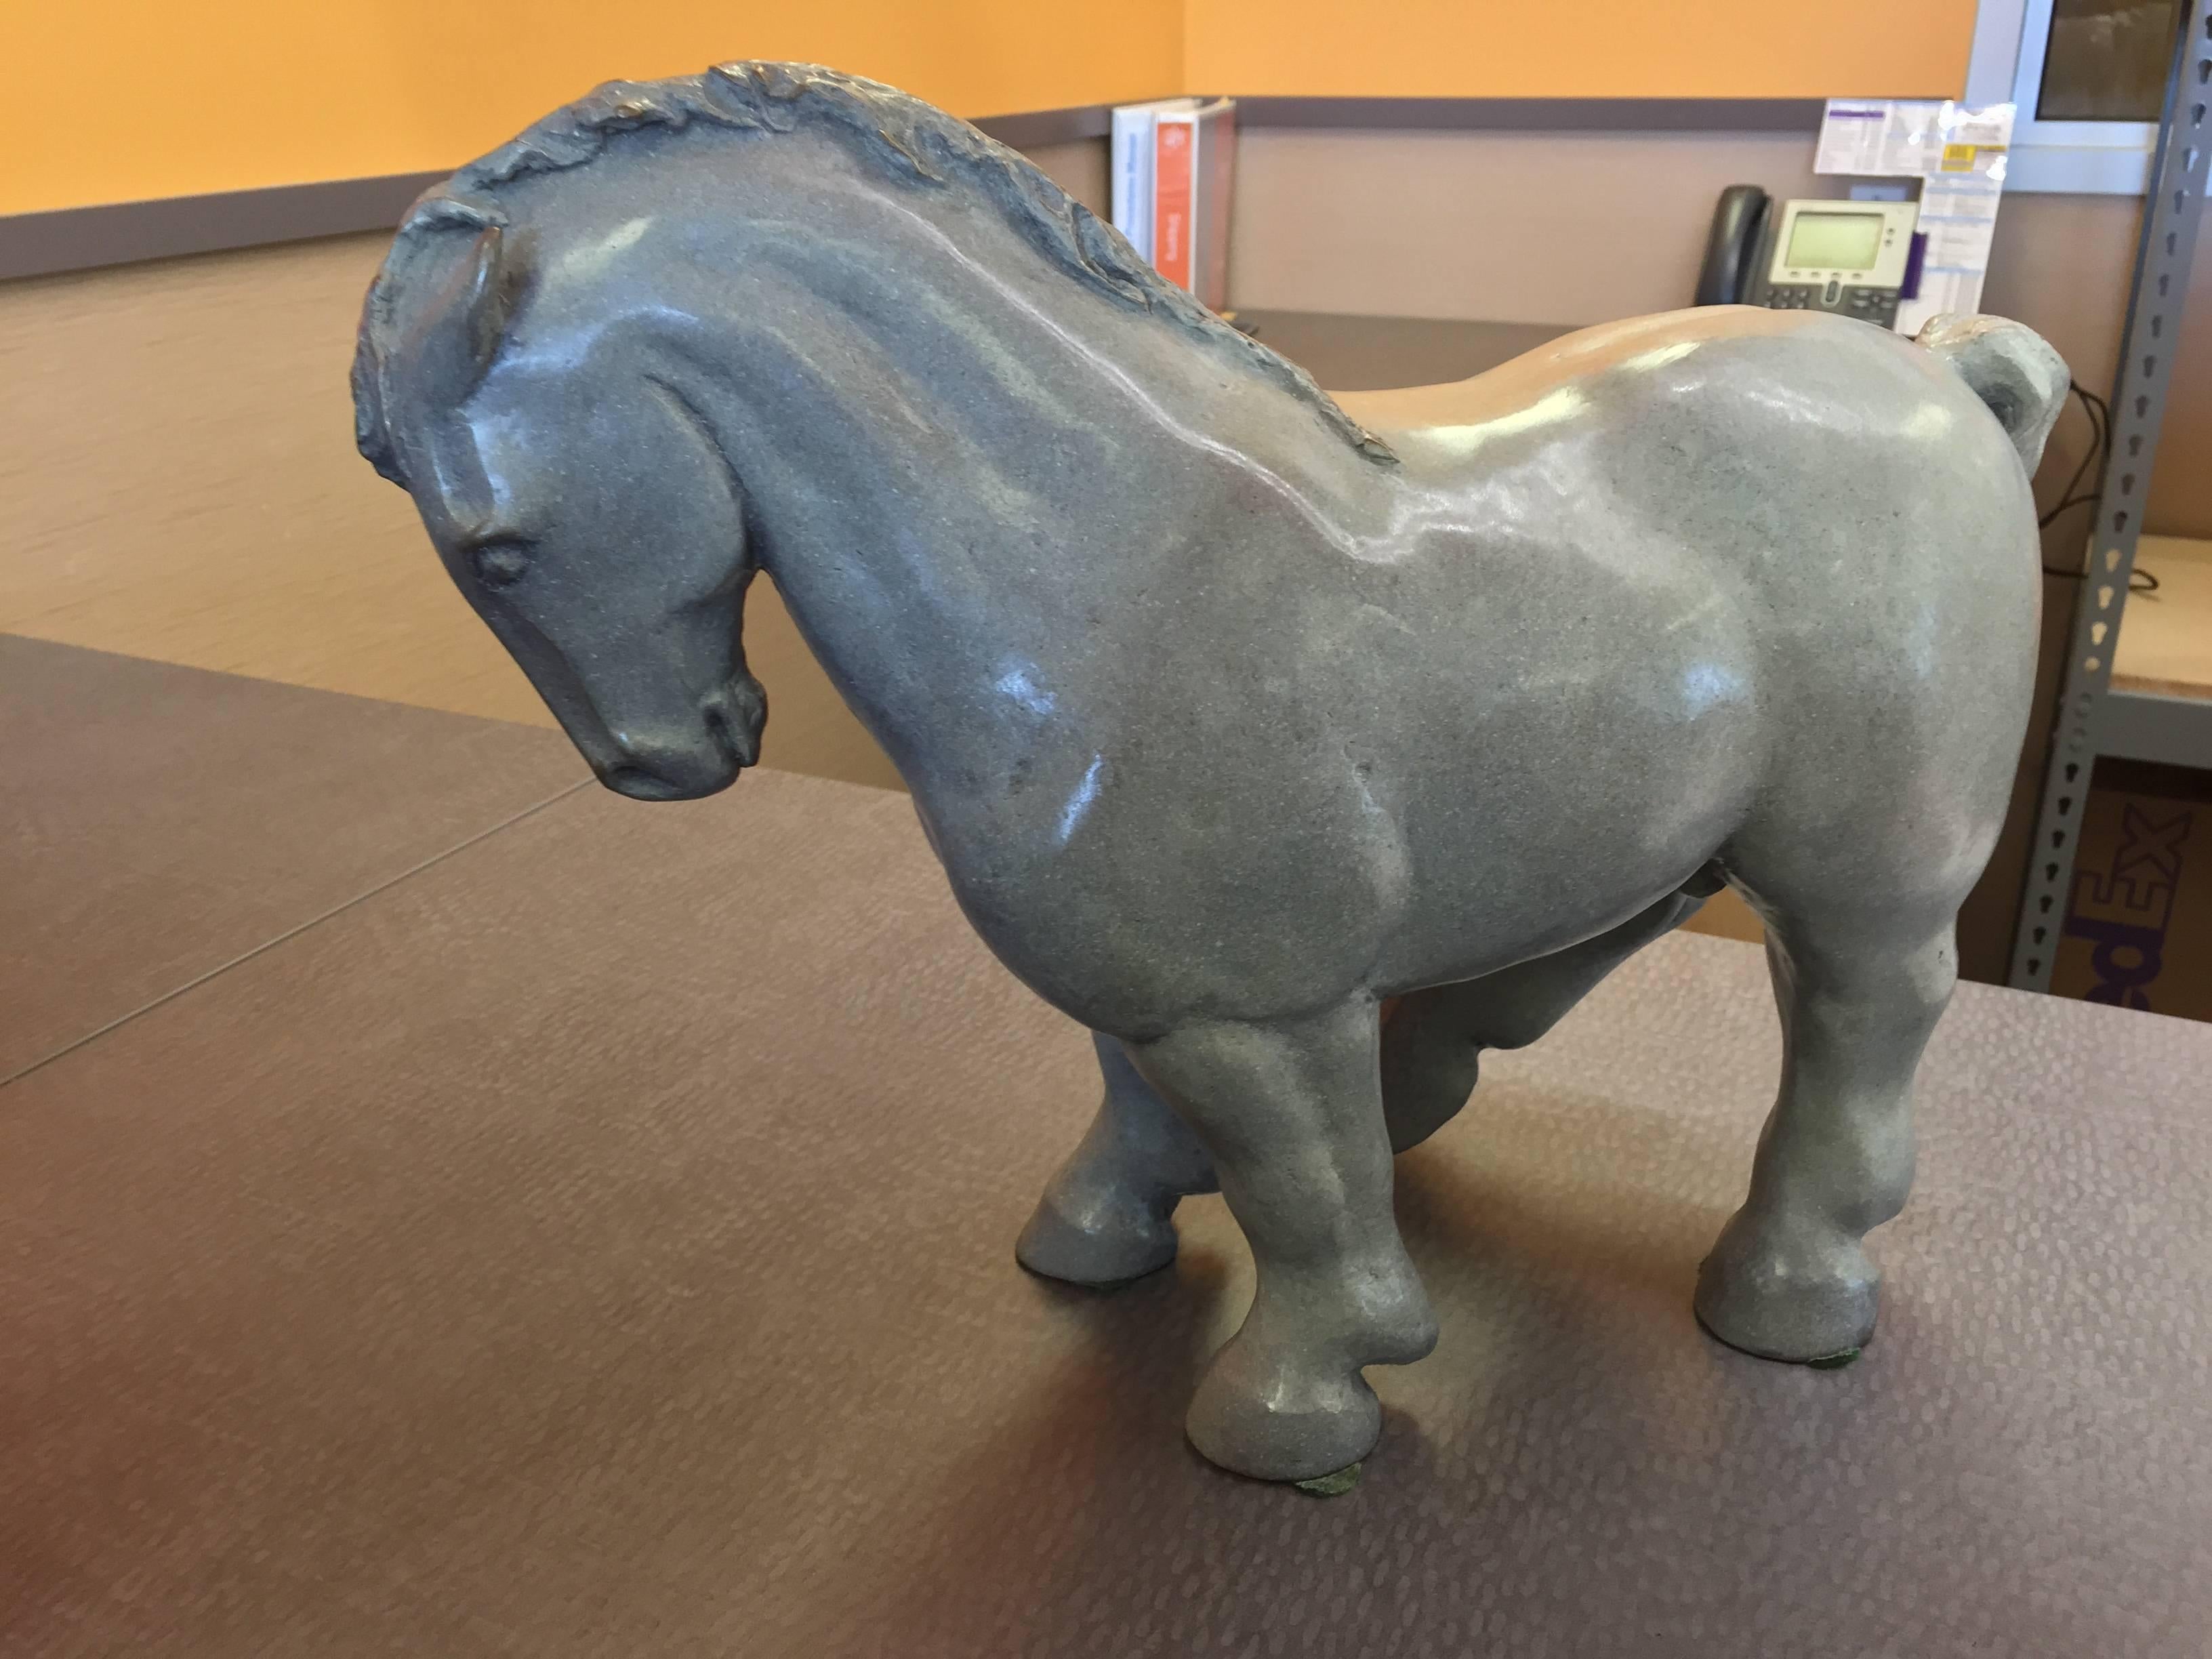 A pretty glazed bronze titled Bucephalus after Alexander the great famous beloved horse.
From the artist's website.
An internationally recognized sculptor and an avid horsewoman, Andreason is noted for her powerful bronze, cast stone and clay